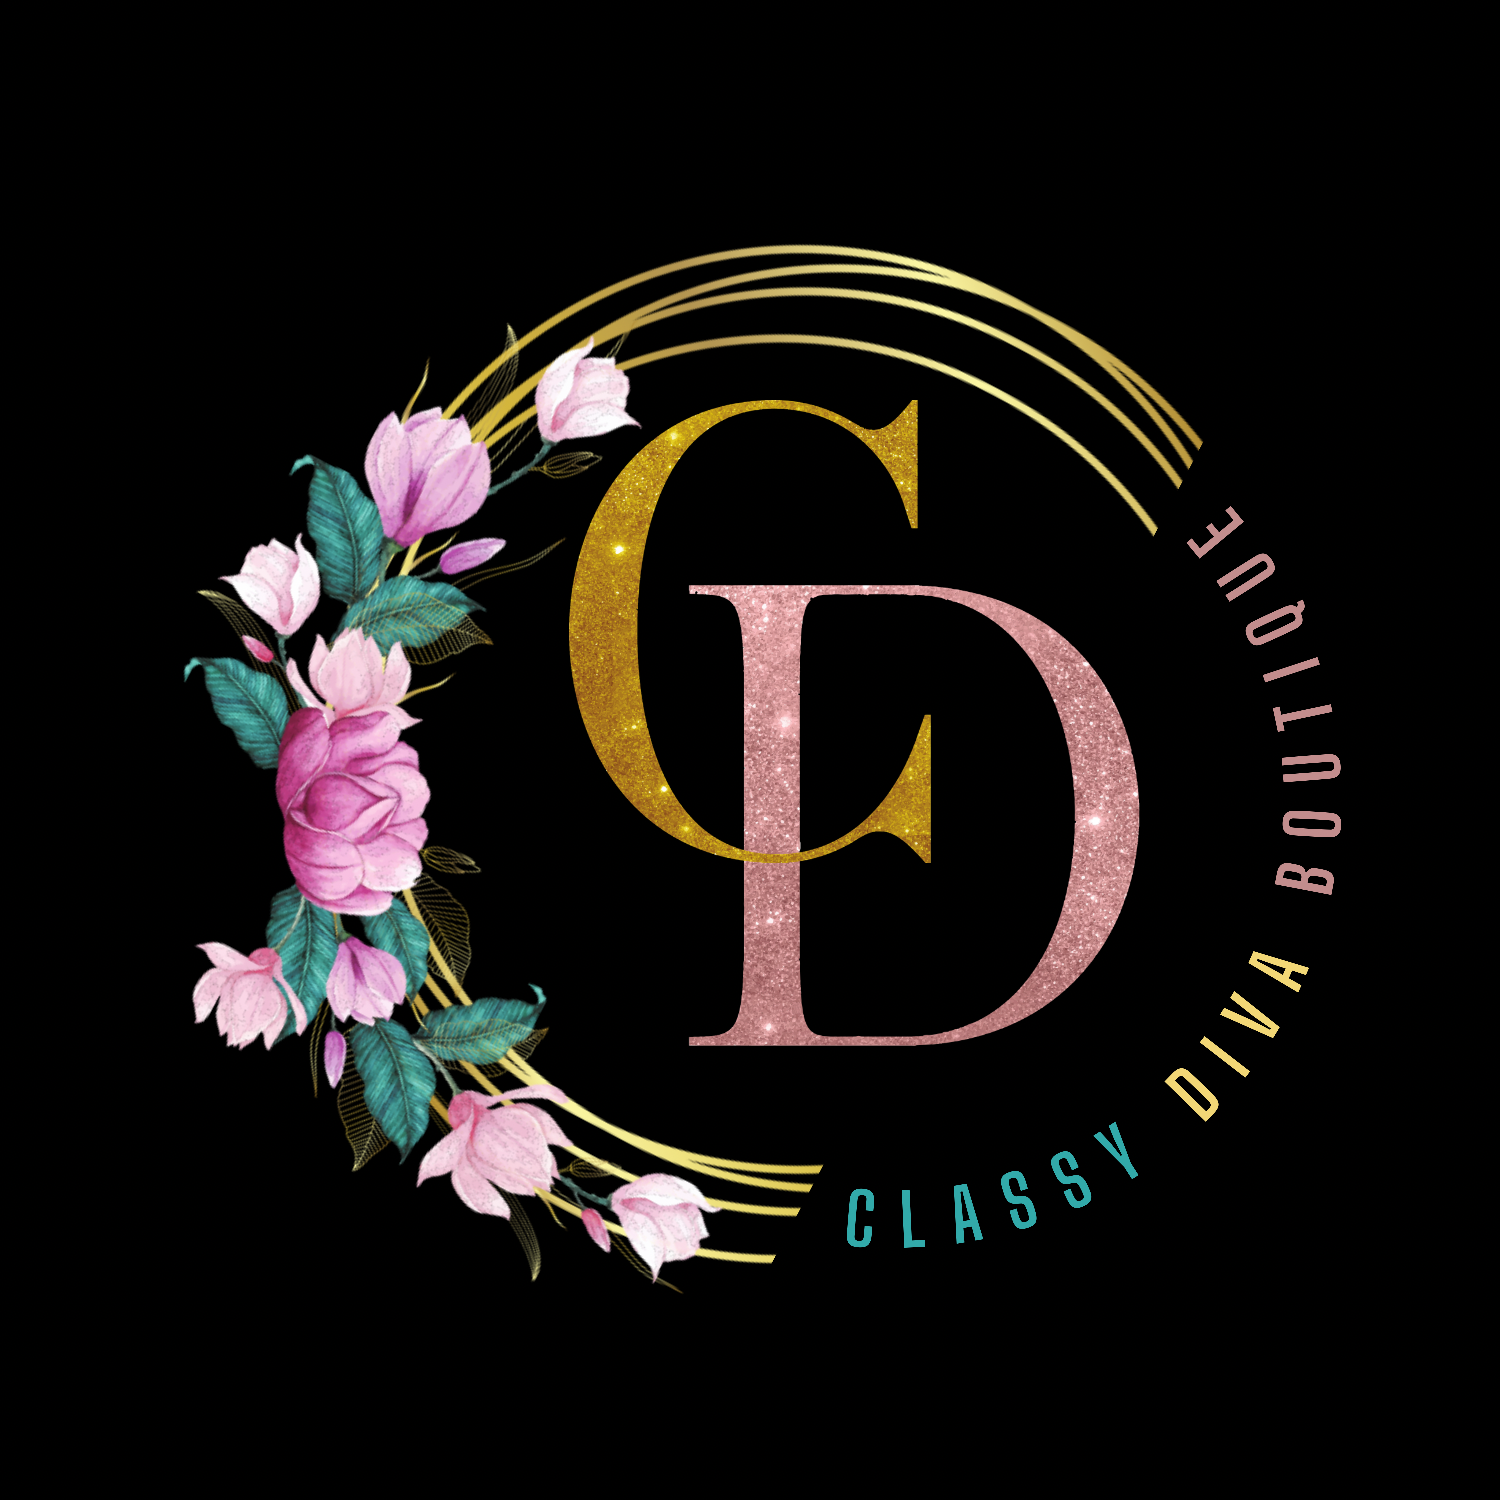 Stylish Diva Boutique - Classy, Comfy, Chic, & Sexy Styles